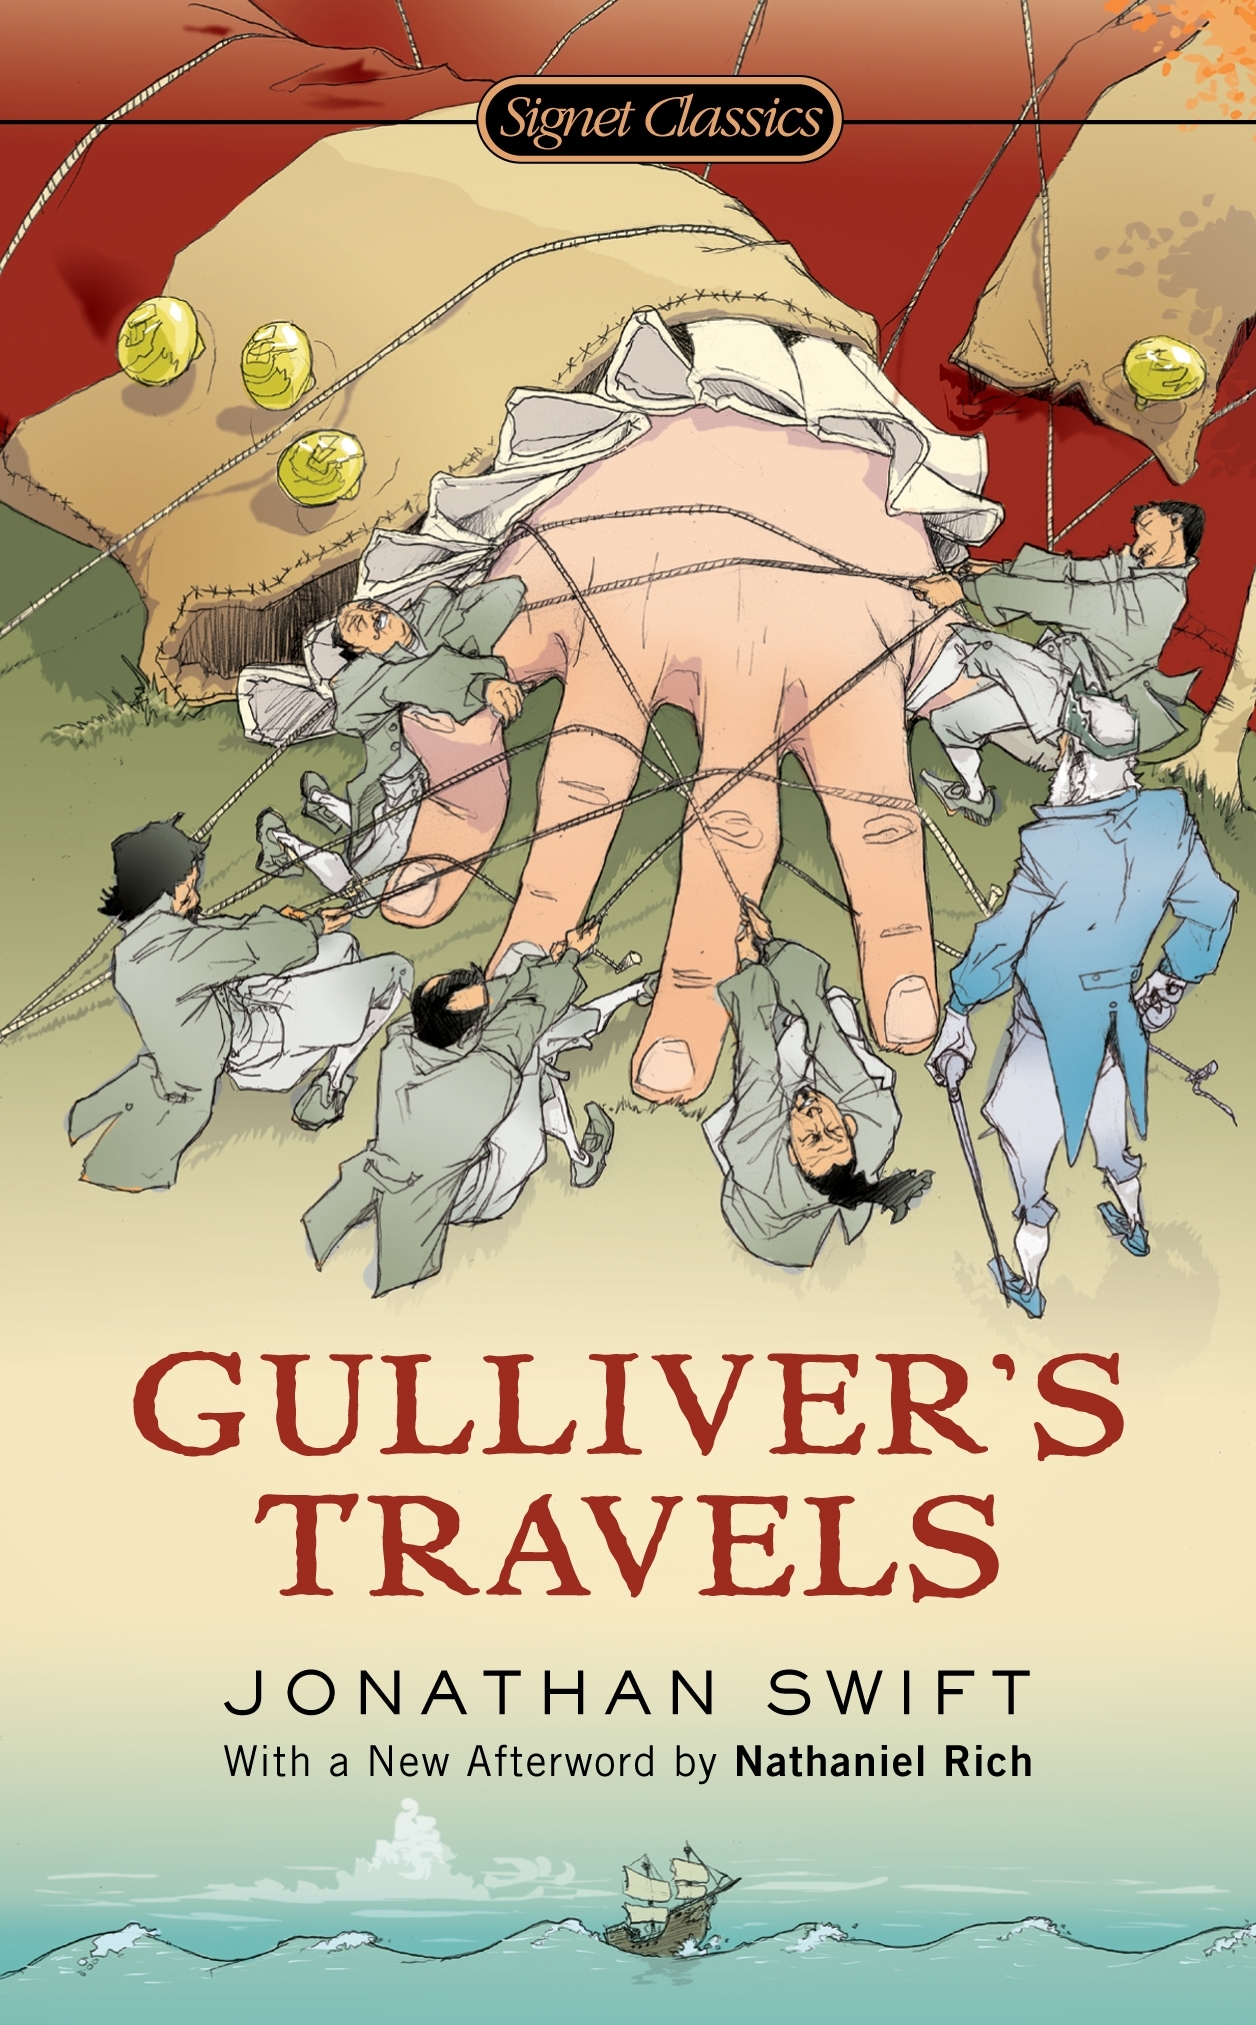 book review on gulliver's travels